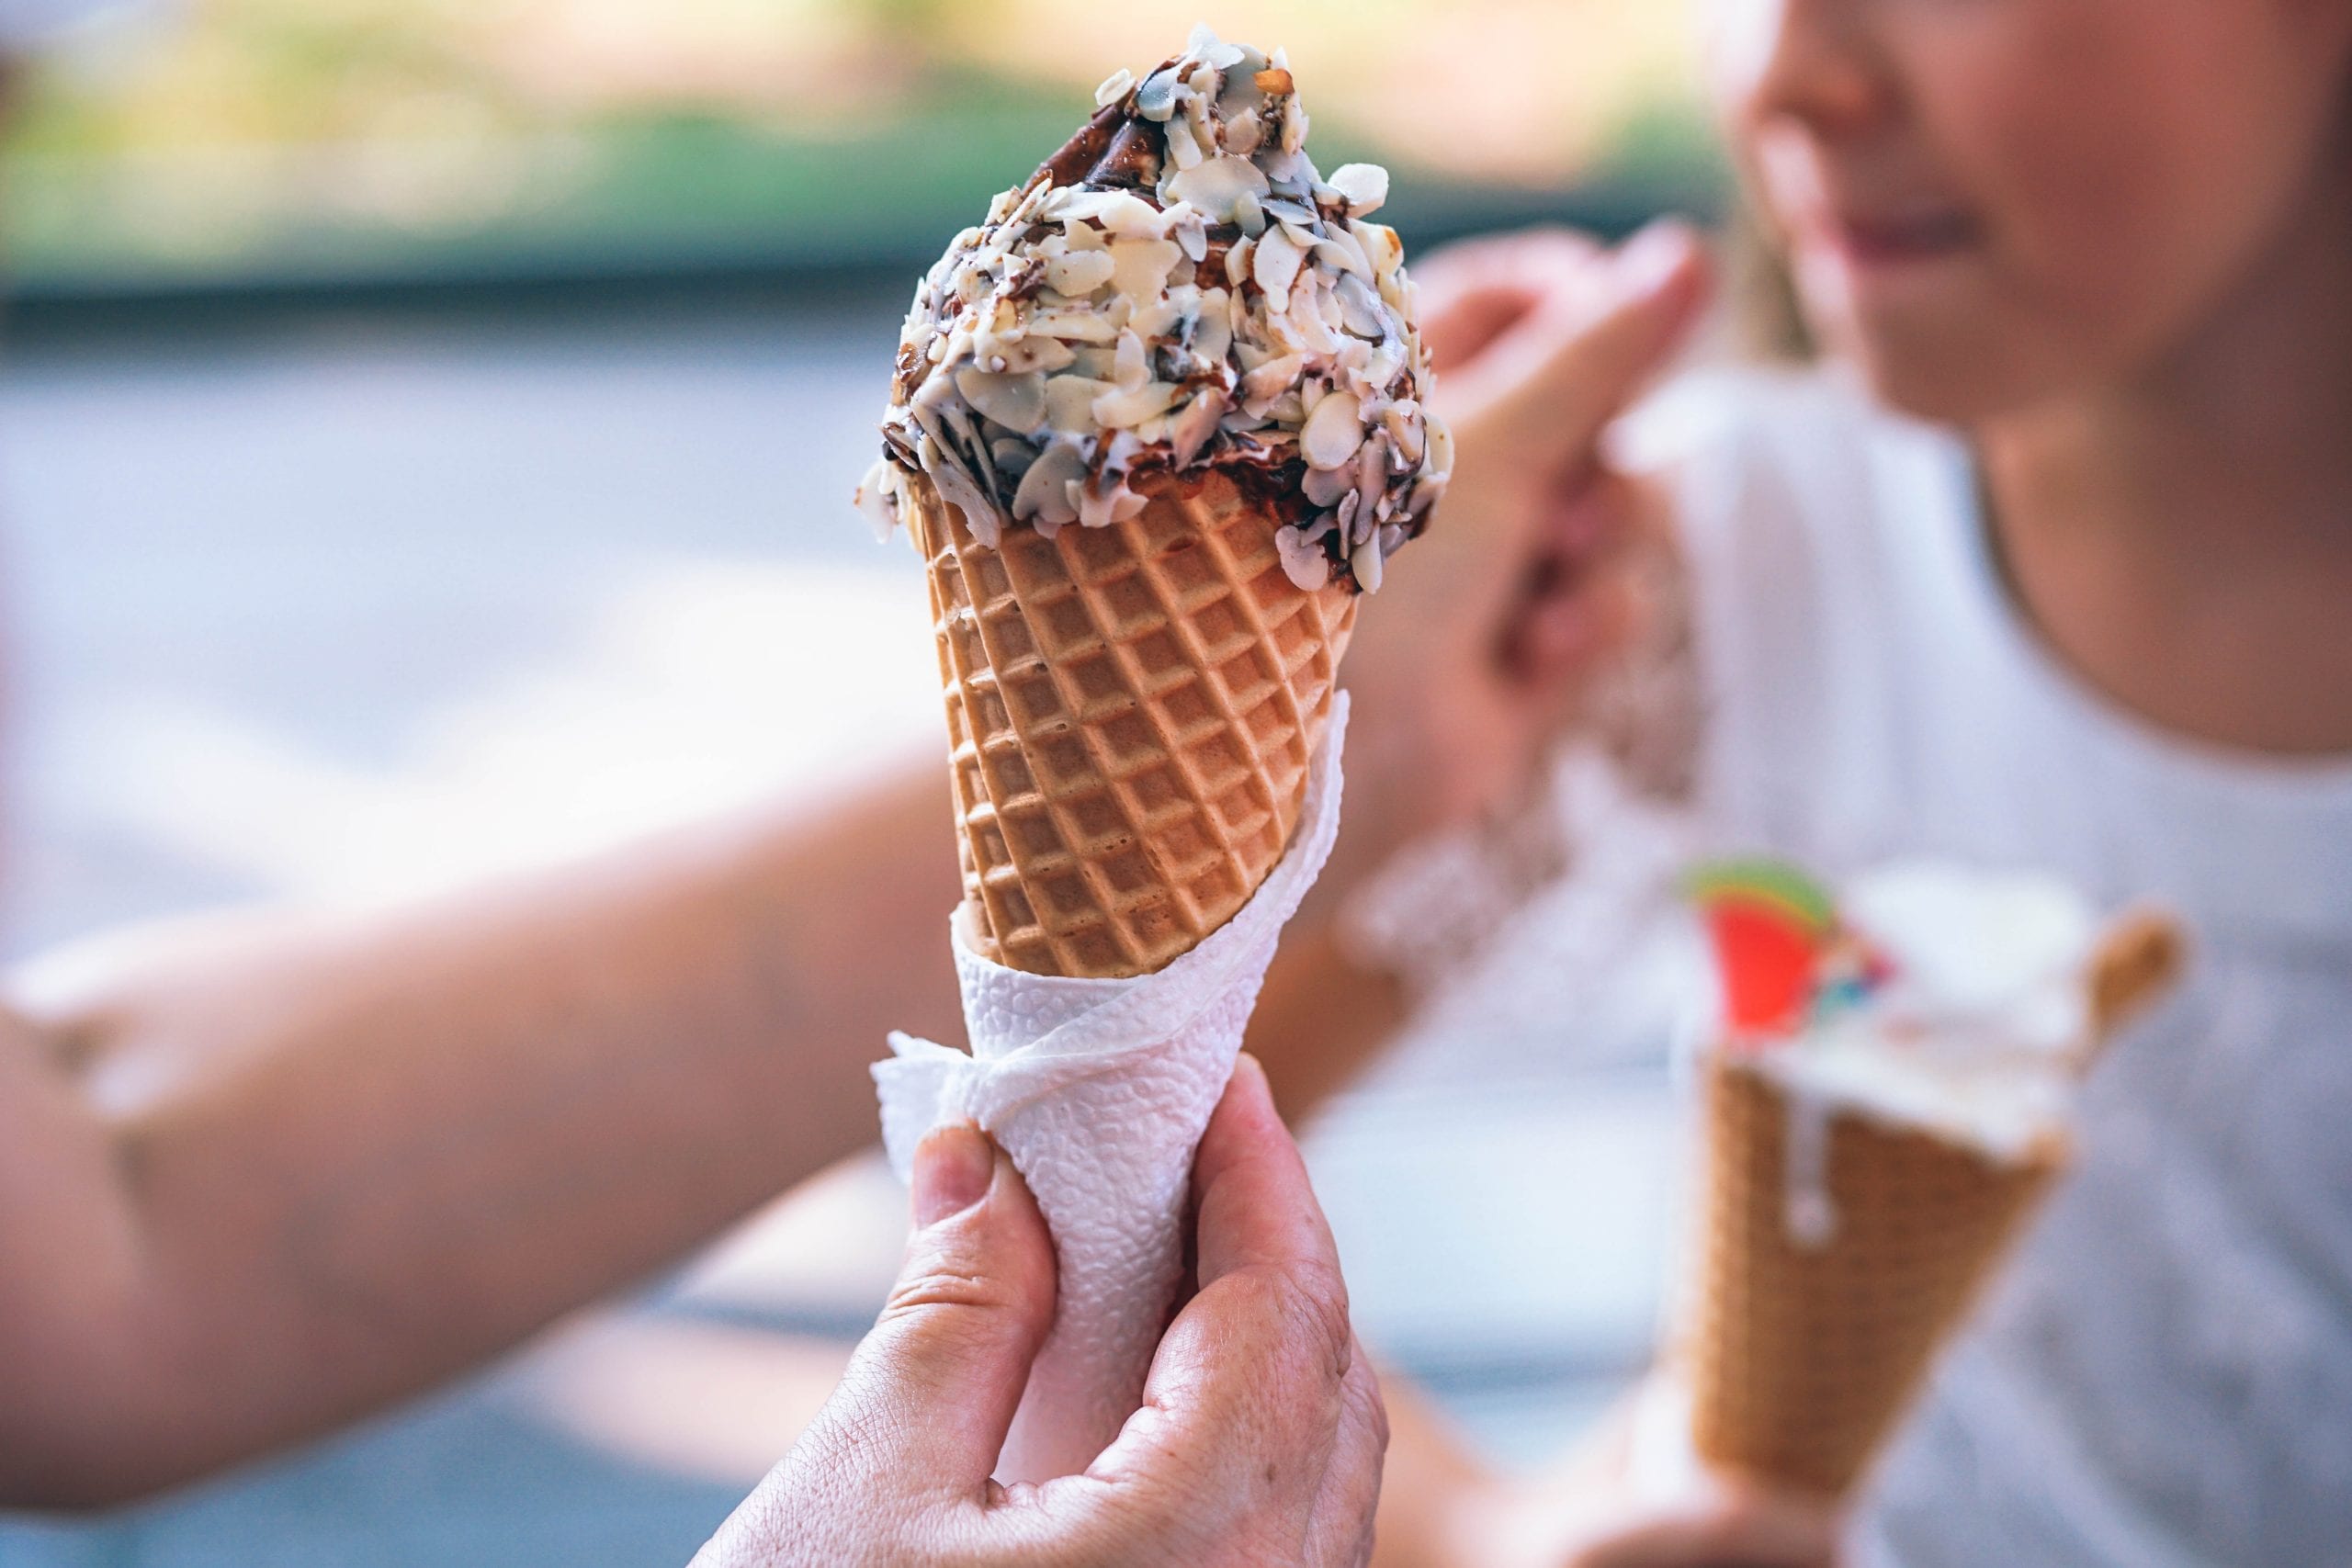 The 10 Best Family-Friendly Ice Cream Shops in Minneapolis